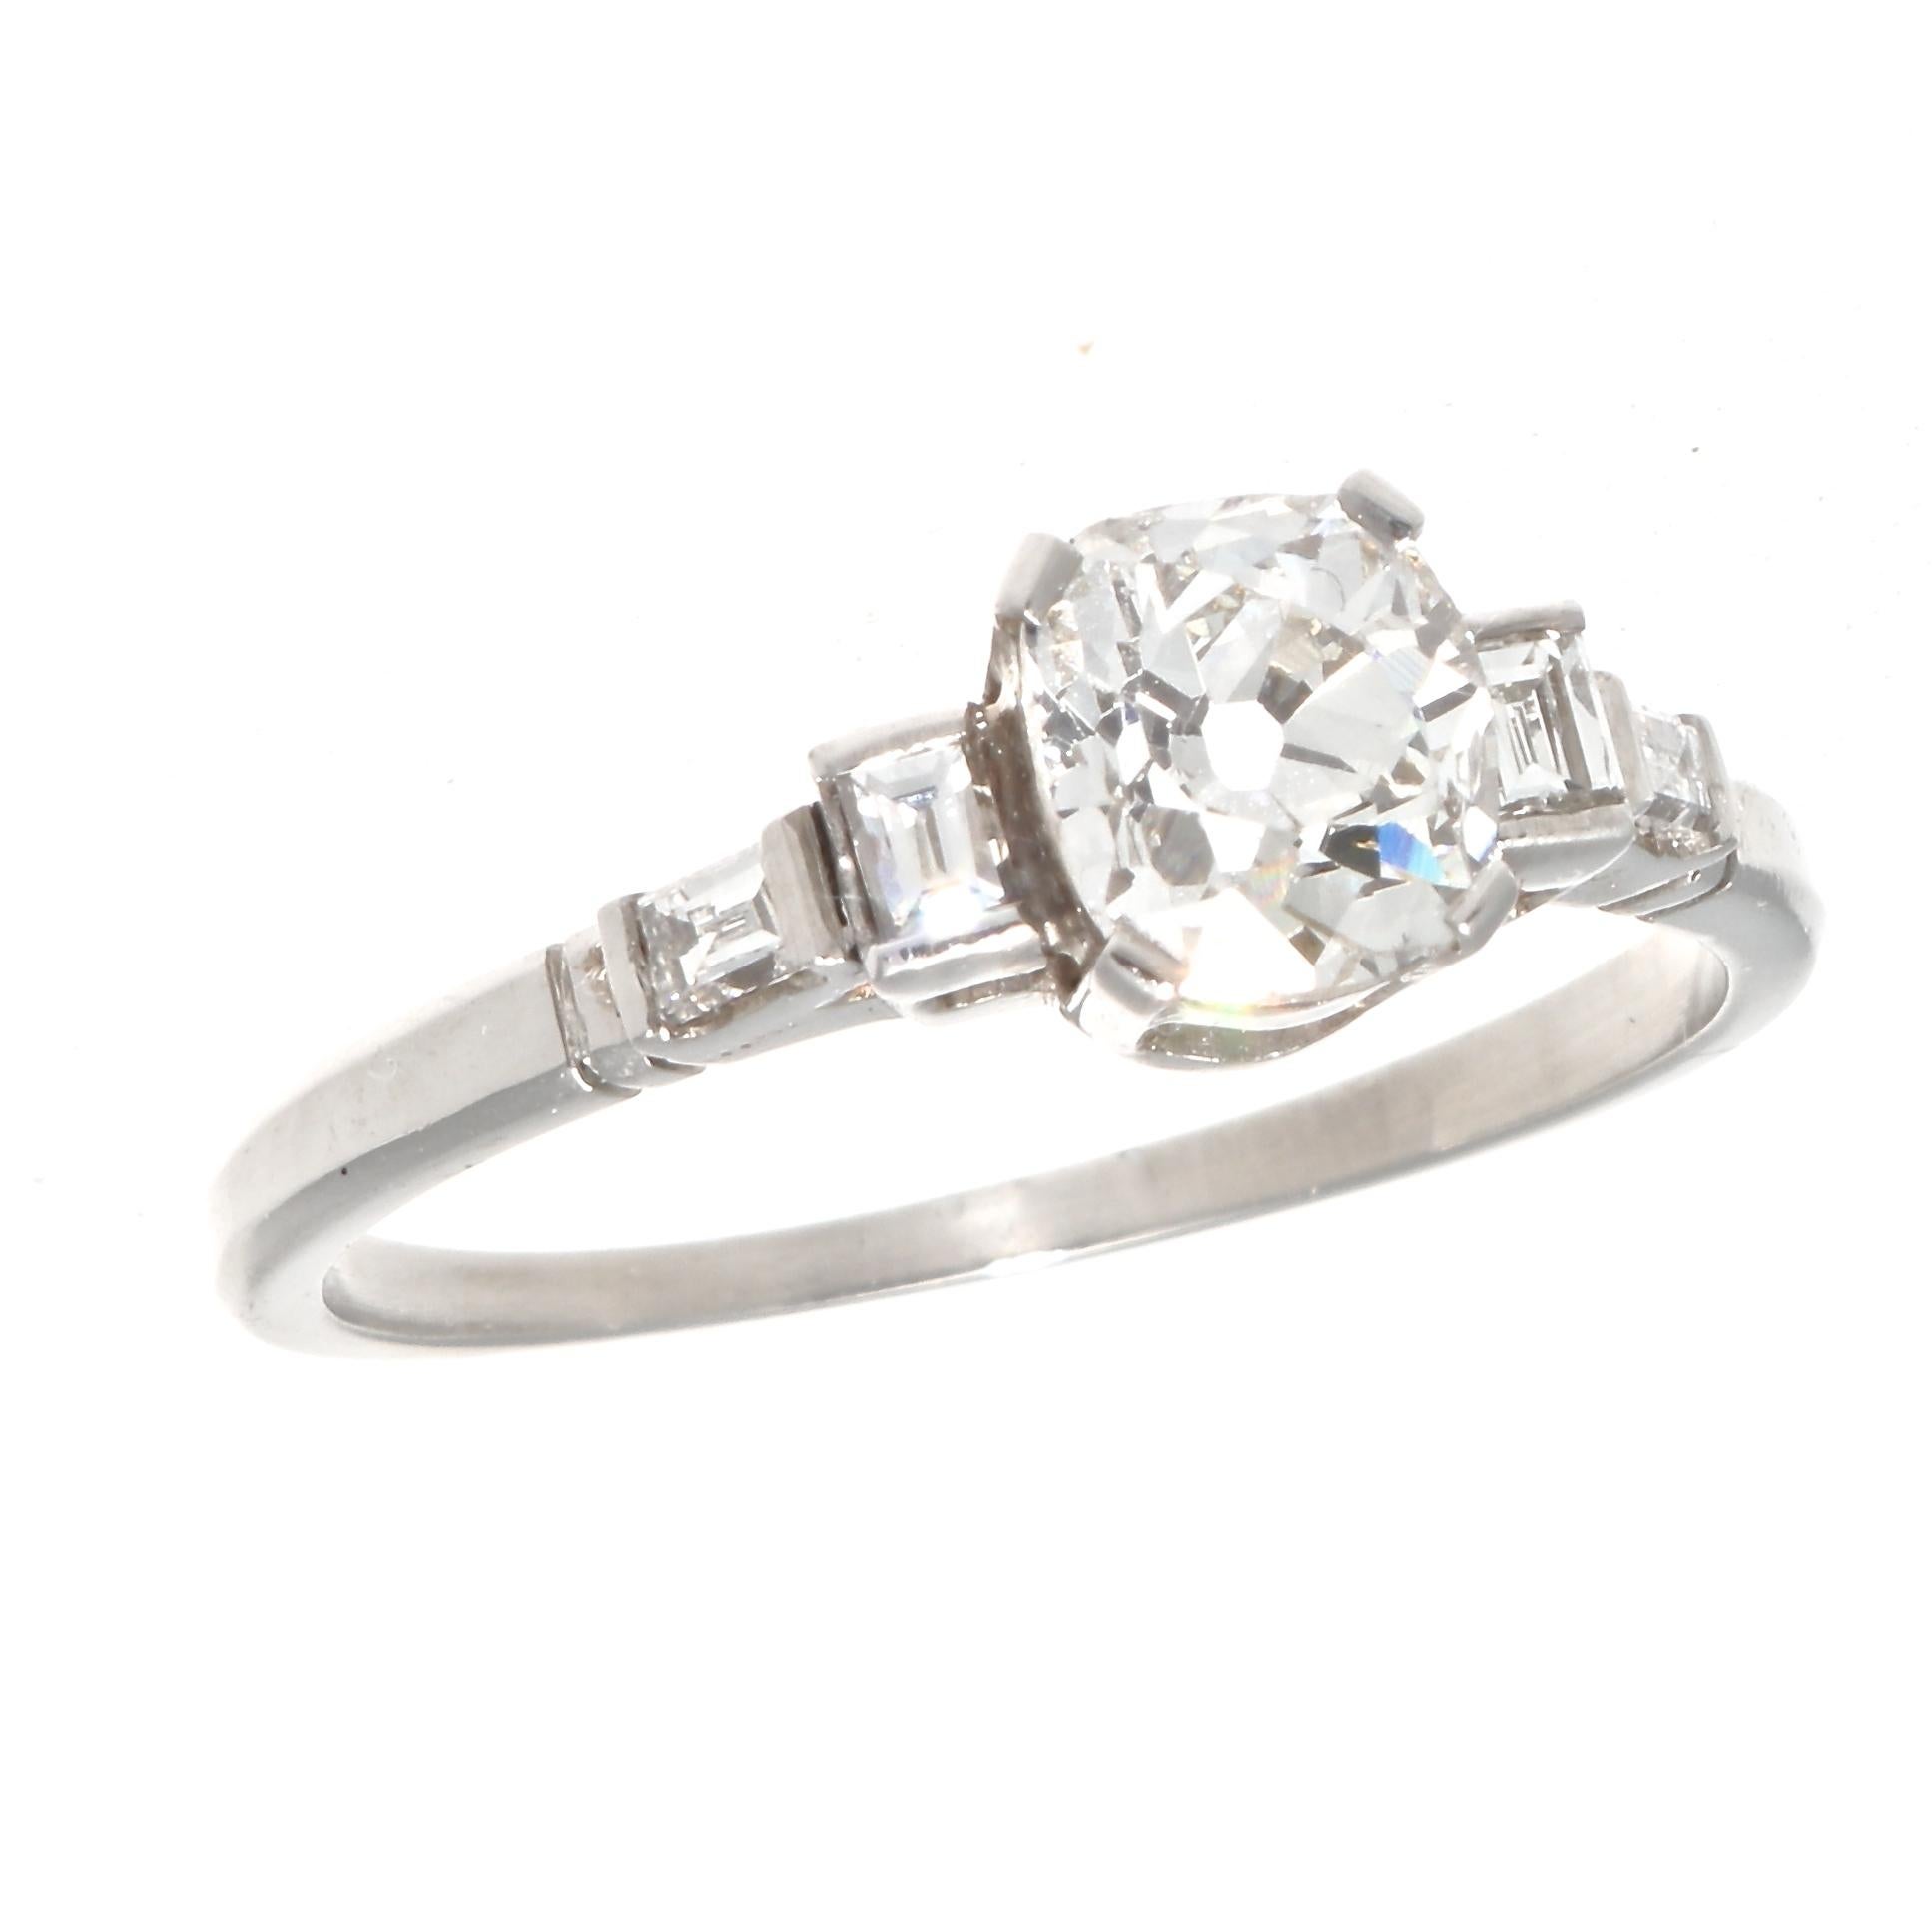 While the tradition of expressing one’s commitment has varied throughout the ages and across cultures, by the 1930s, the diamond engagement ring became a popular symbol to mark the promise of eternal love. Featuring a 0.91 carat old mine cut diamond